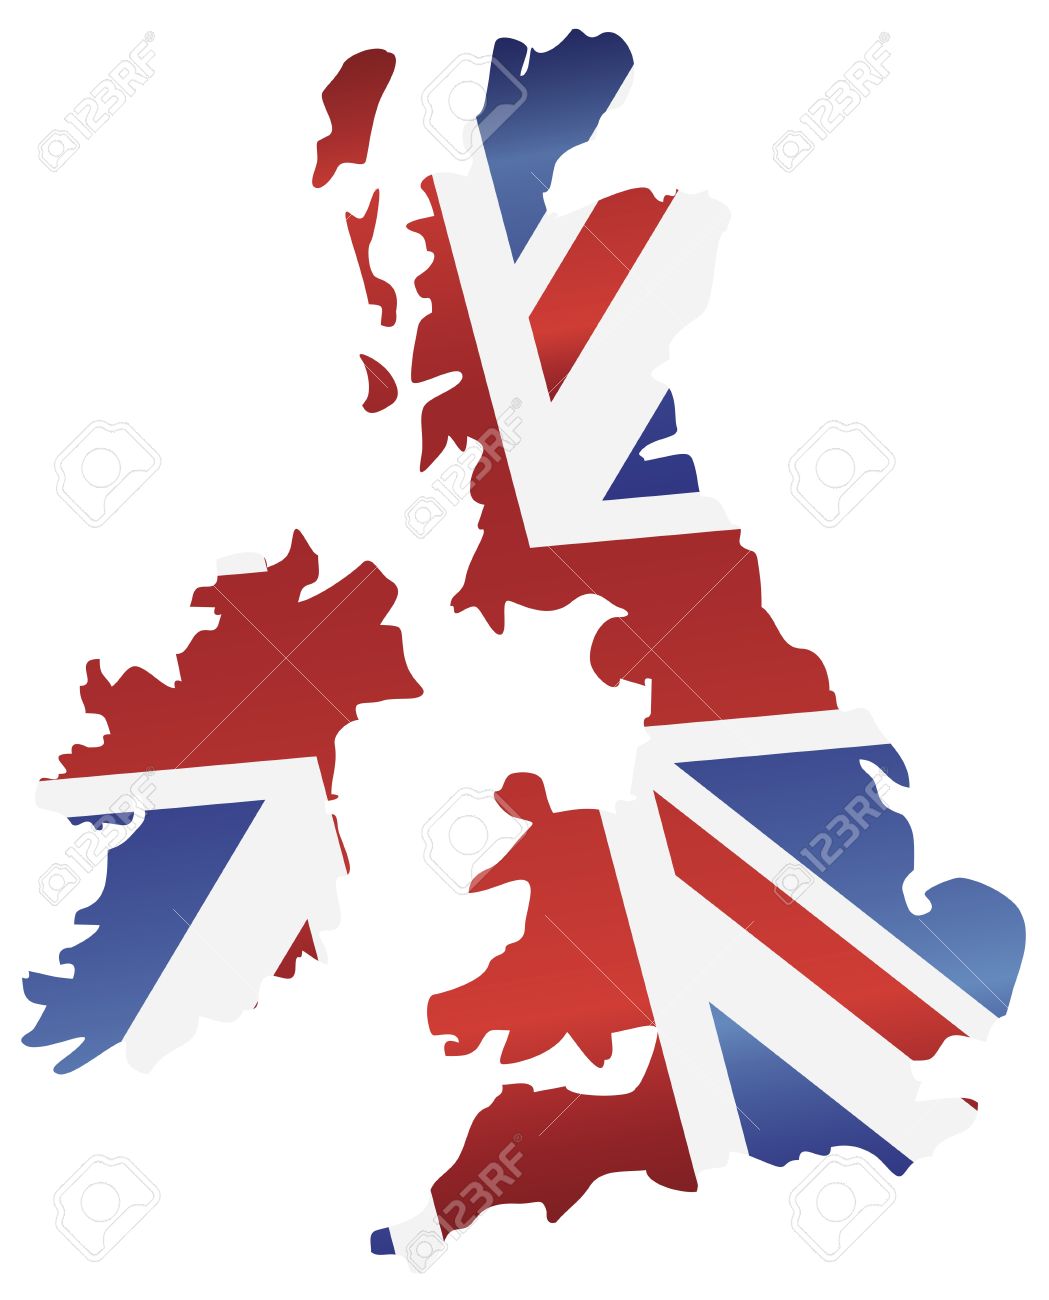 free clipart map of england - photo #11